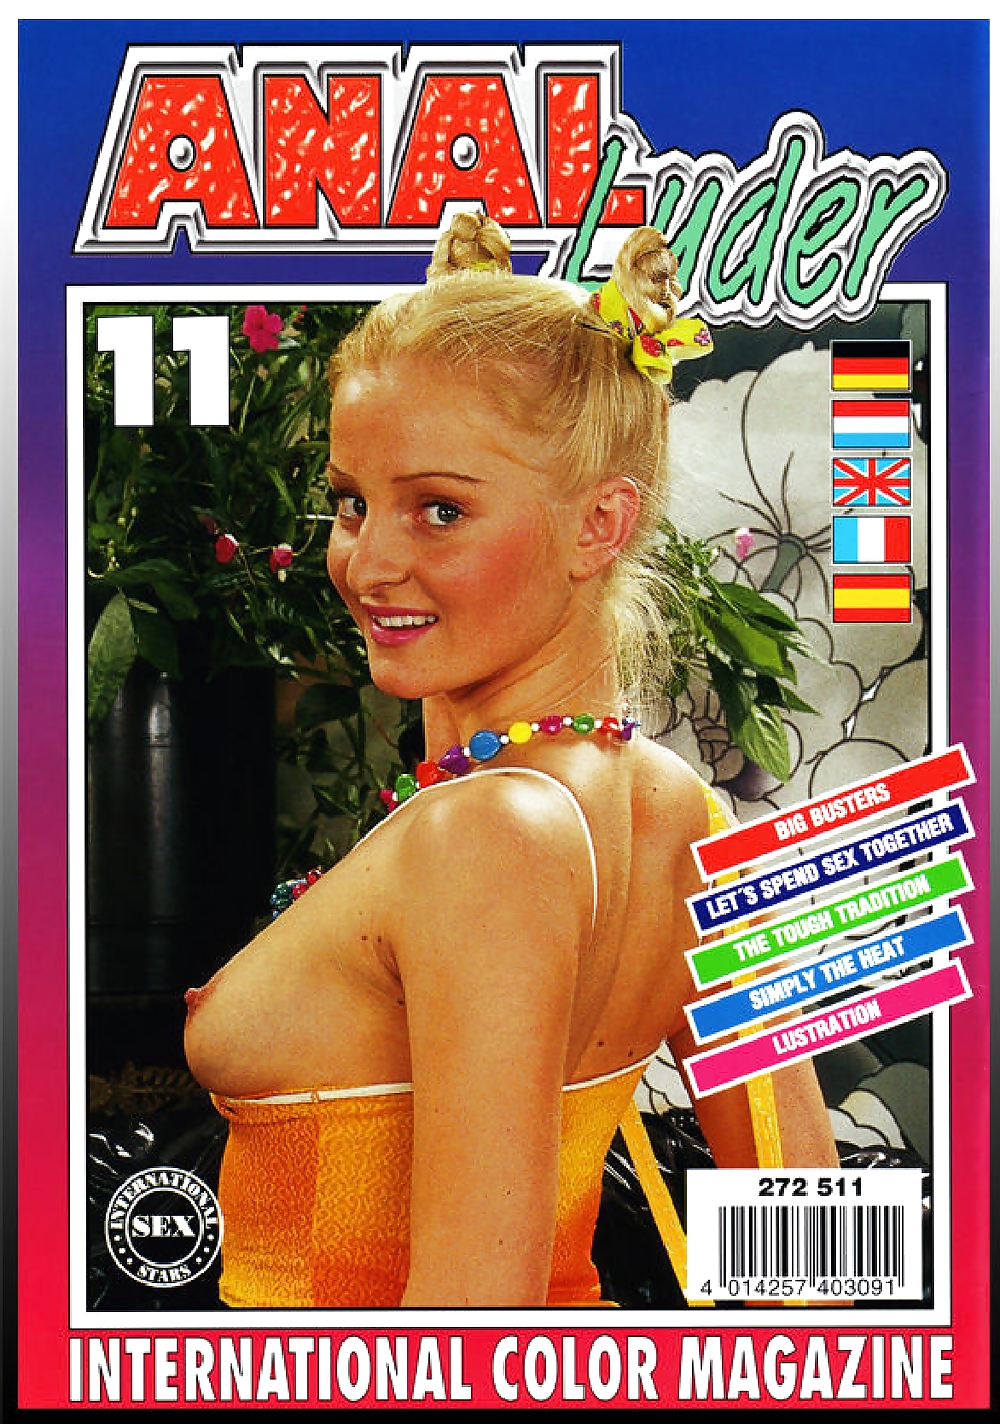 Magazin-Scan-Silwa Special-anal Luder # 11 #7873467